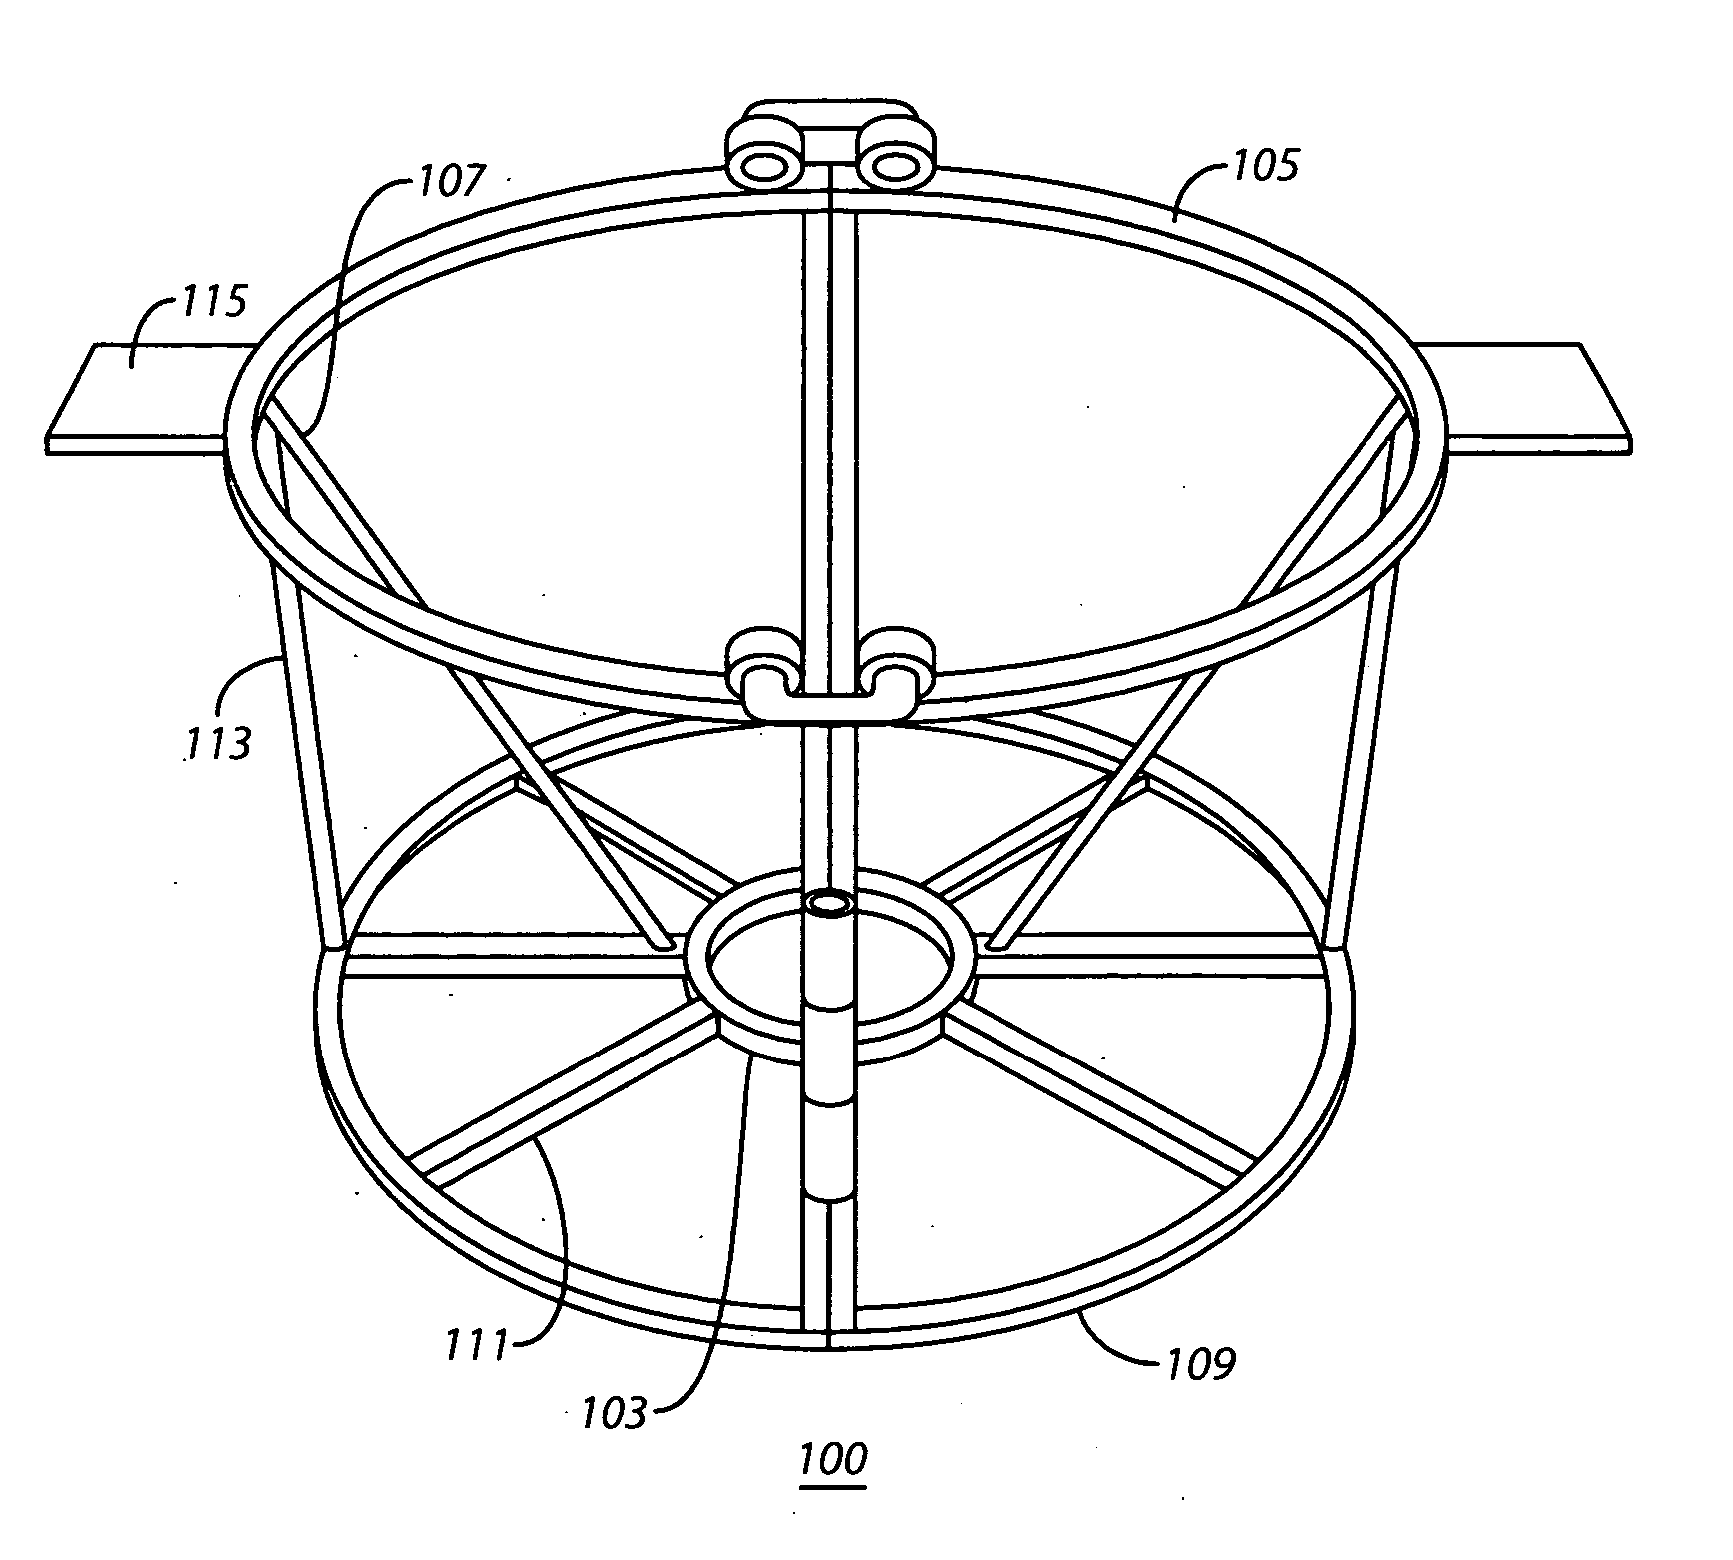 Tree root ball wrapping apparatus and method of using same